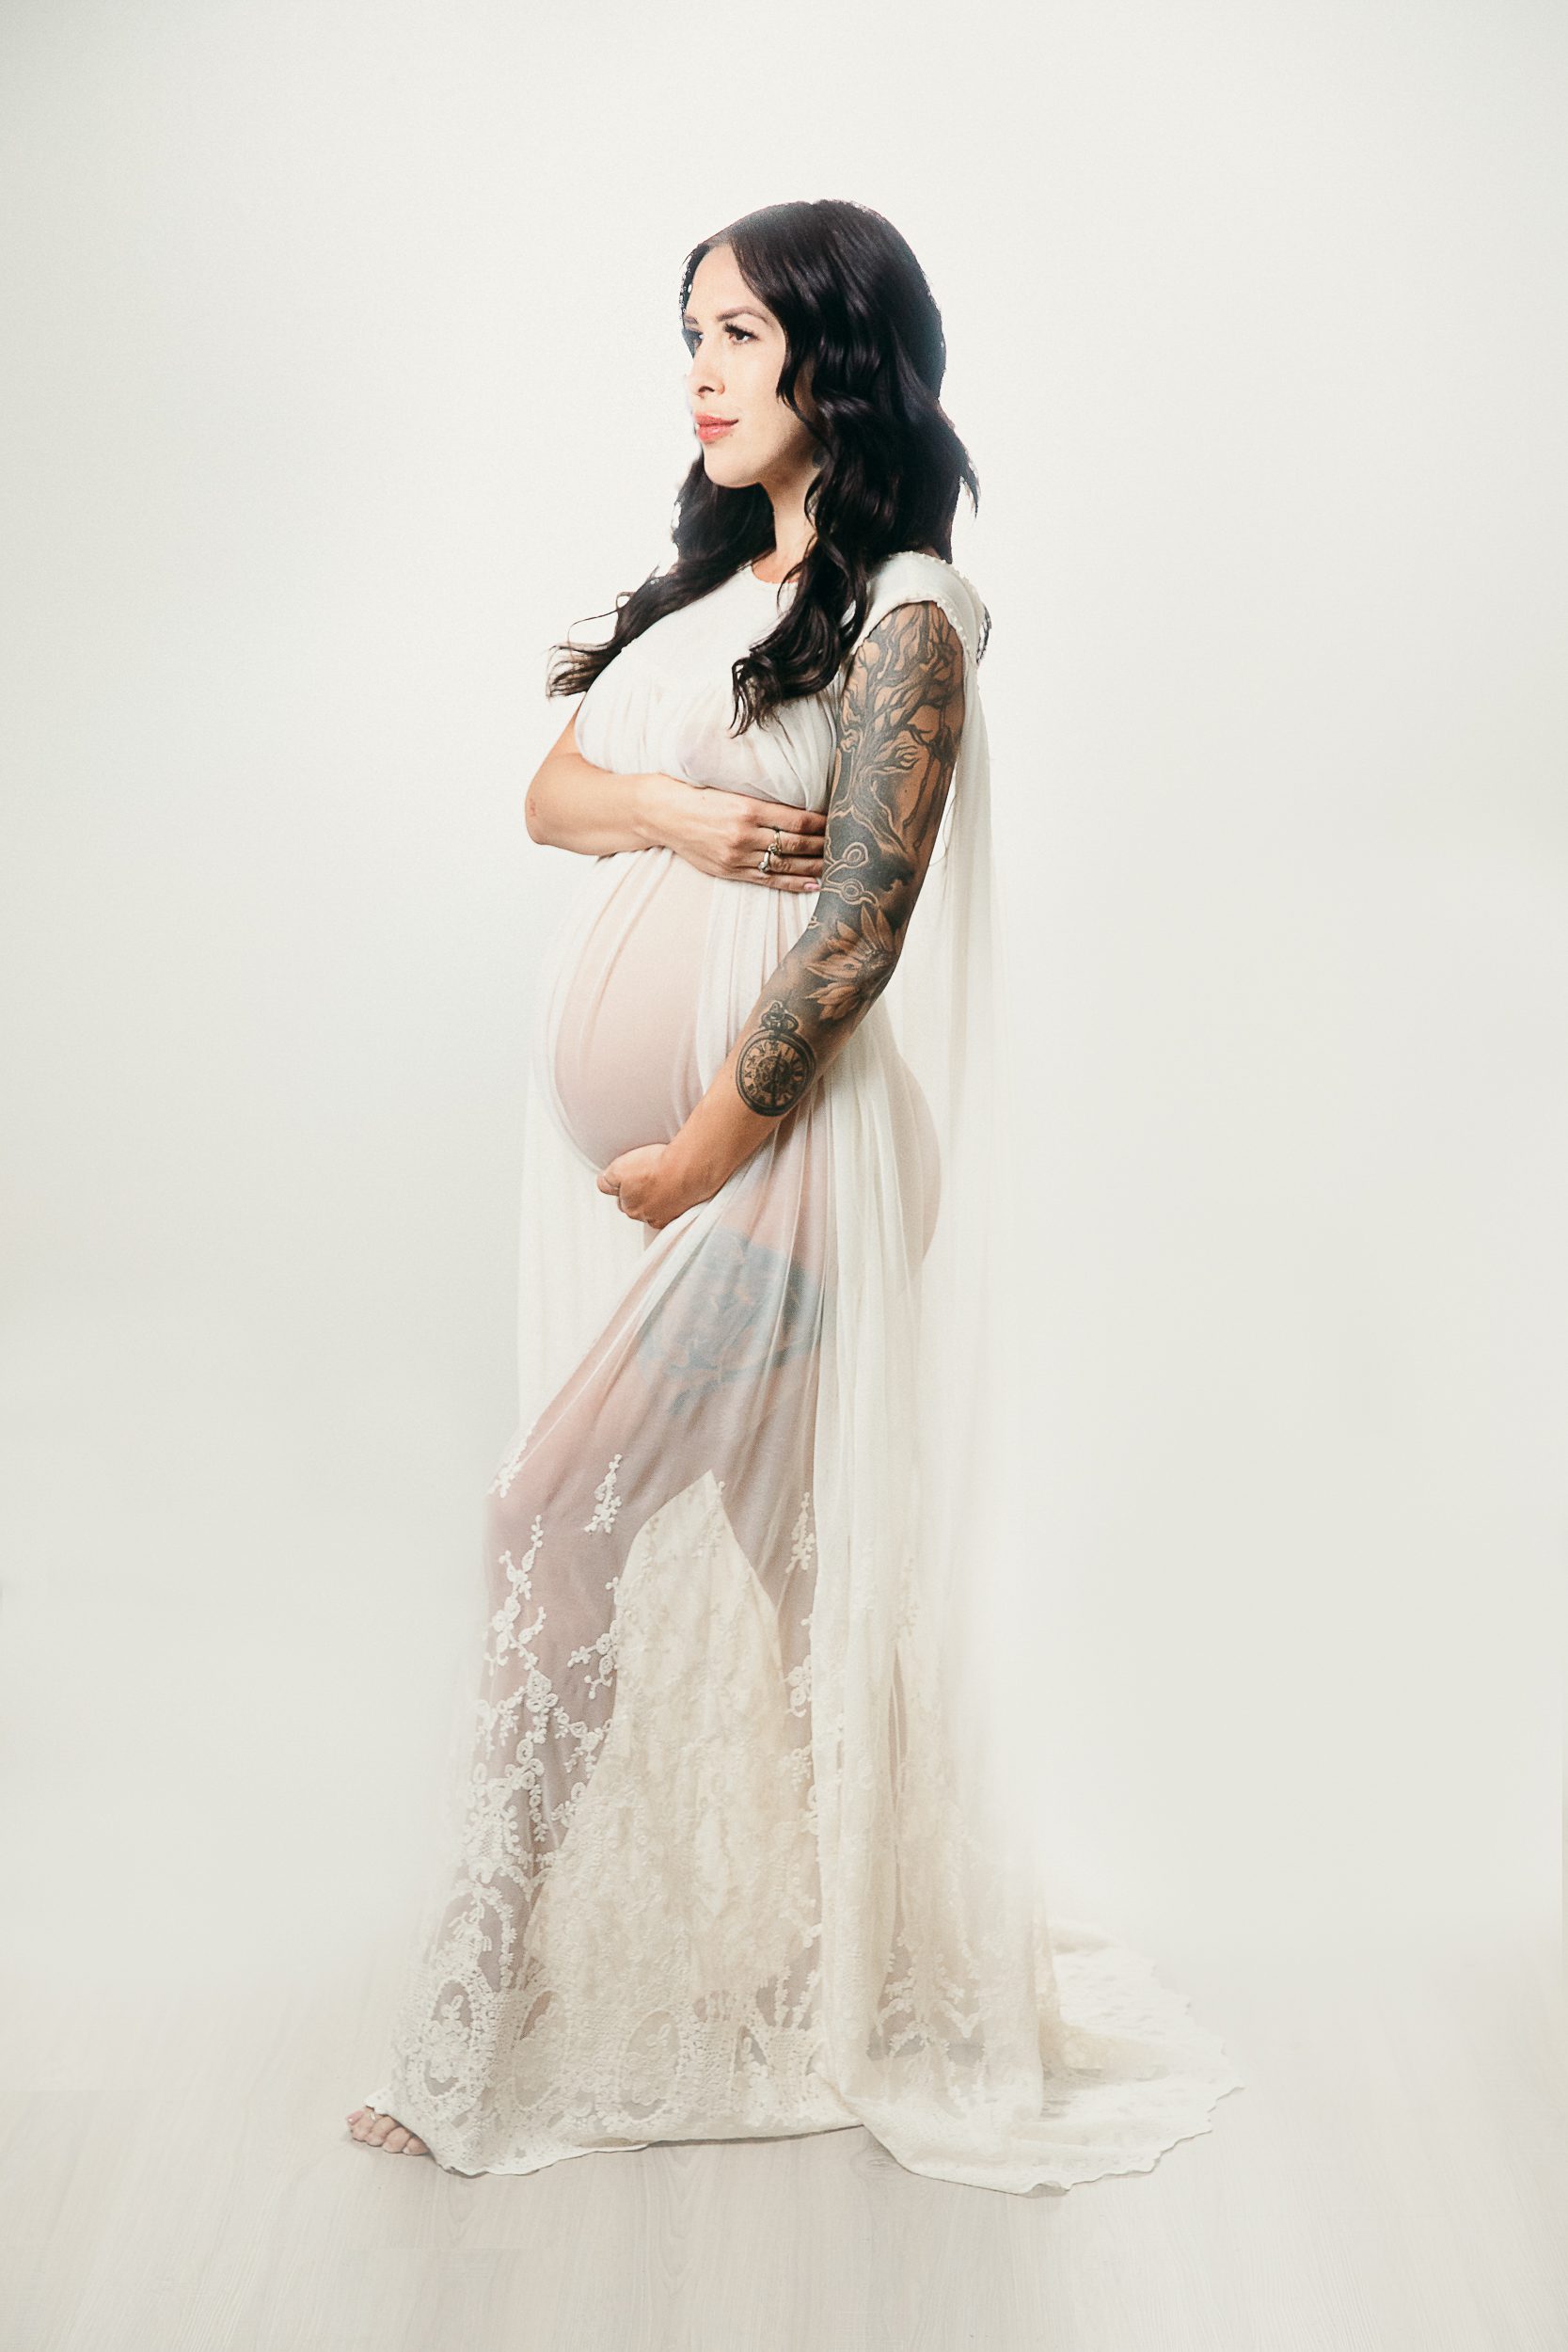 Pregnant tattooed mama wearing a sheer lace dress for her maternity photoshoot orange county.